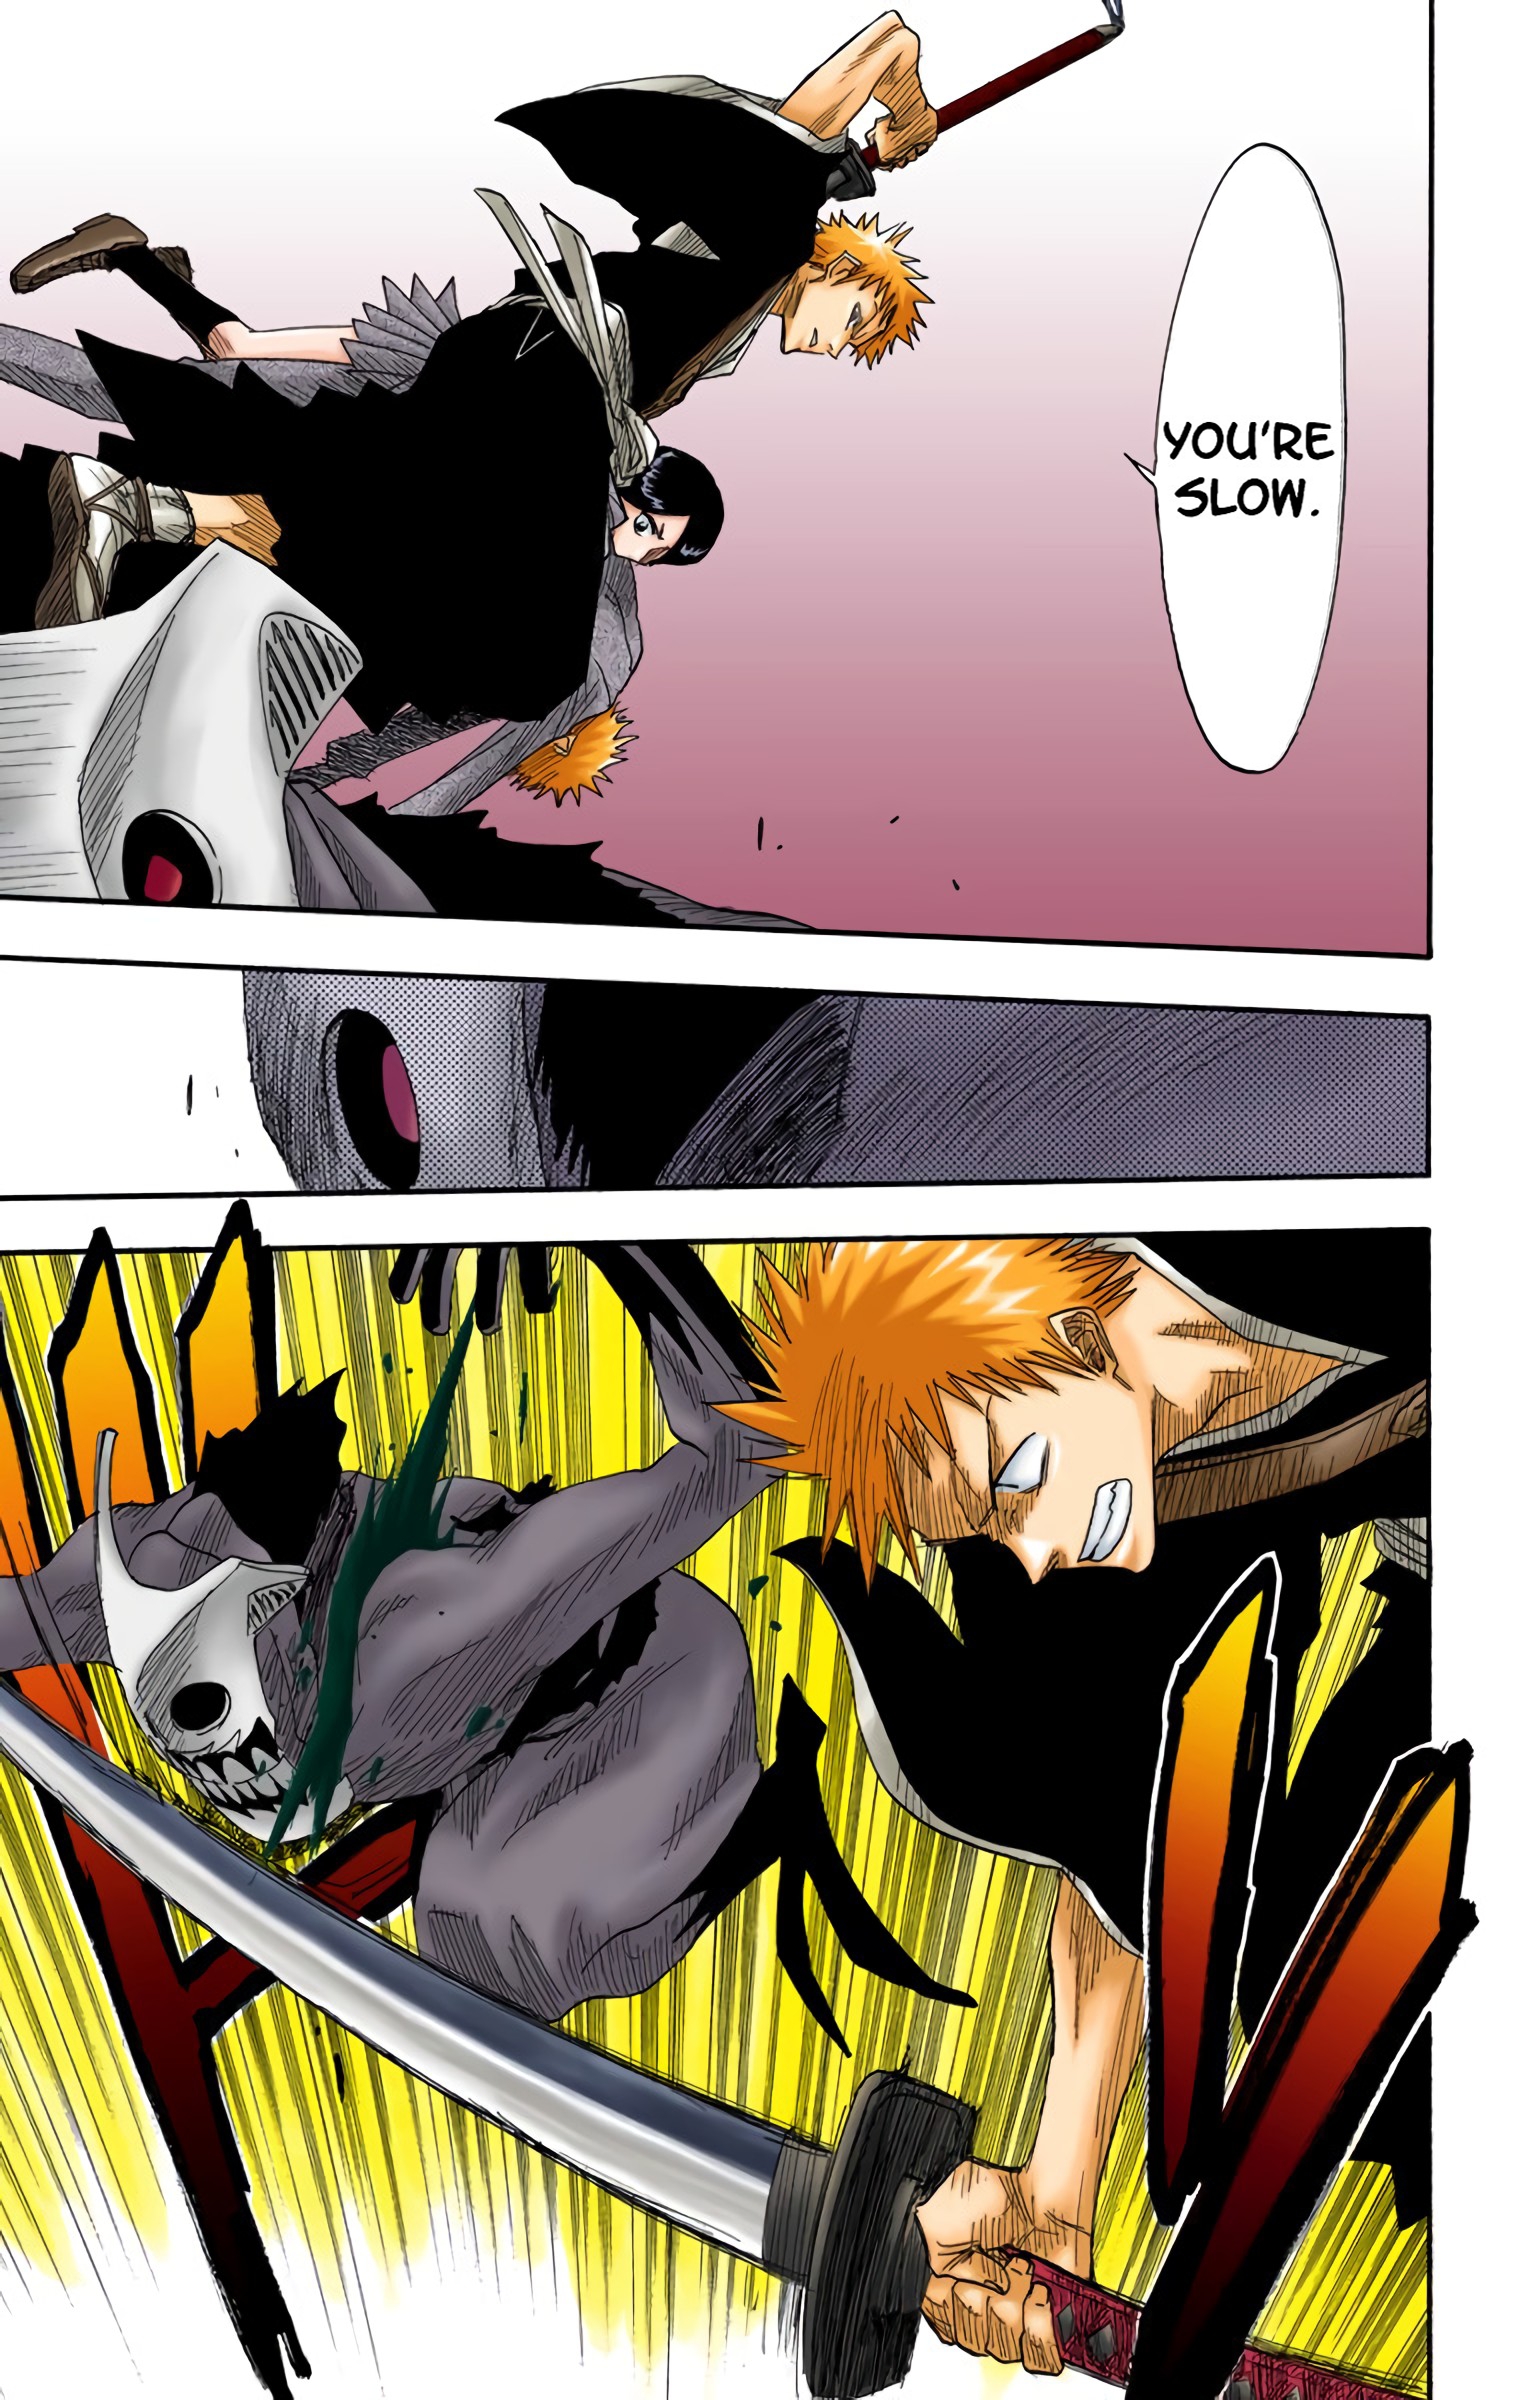 Bleach - Digital Colored Comics Vol.2 Chapter 11: Back. (Leachbomb Or Mom) - Picture 3